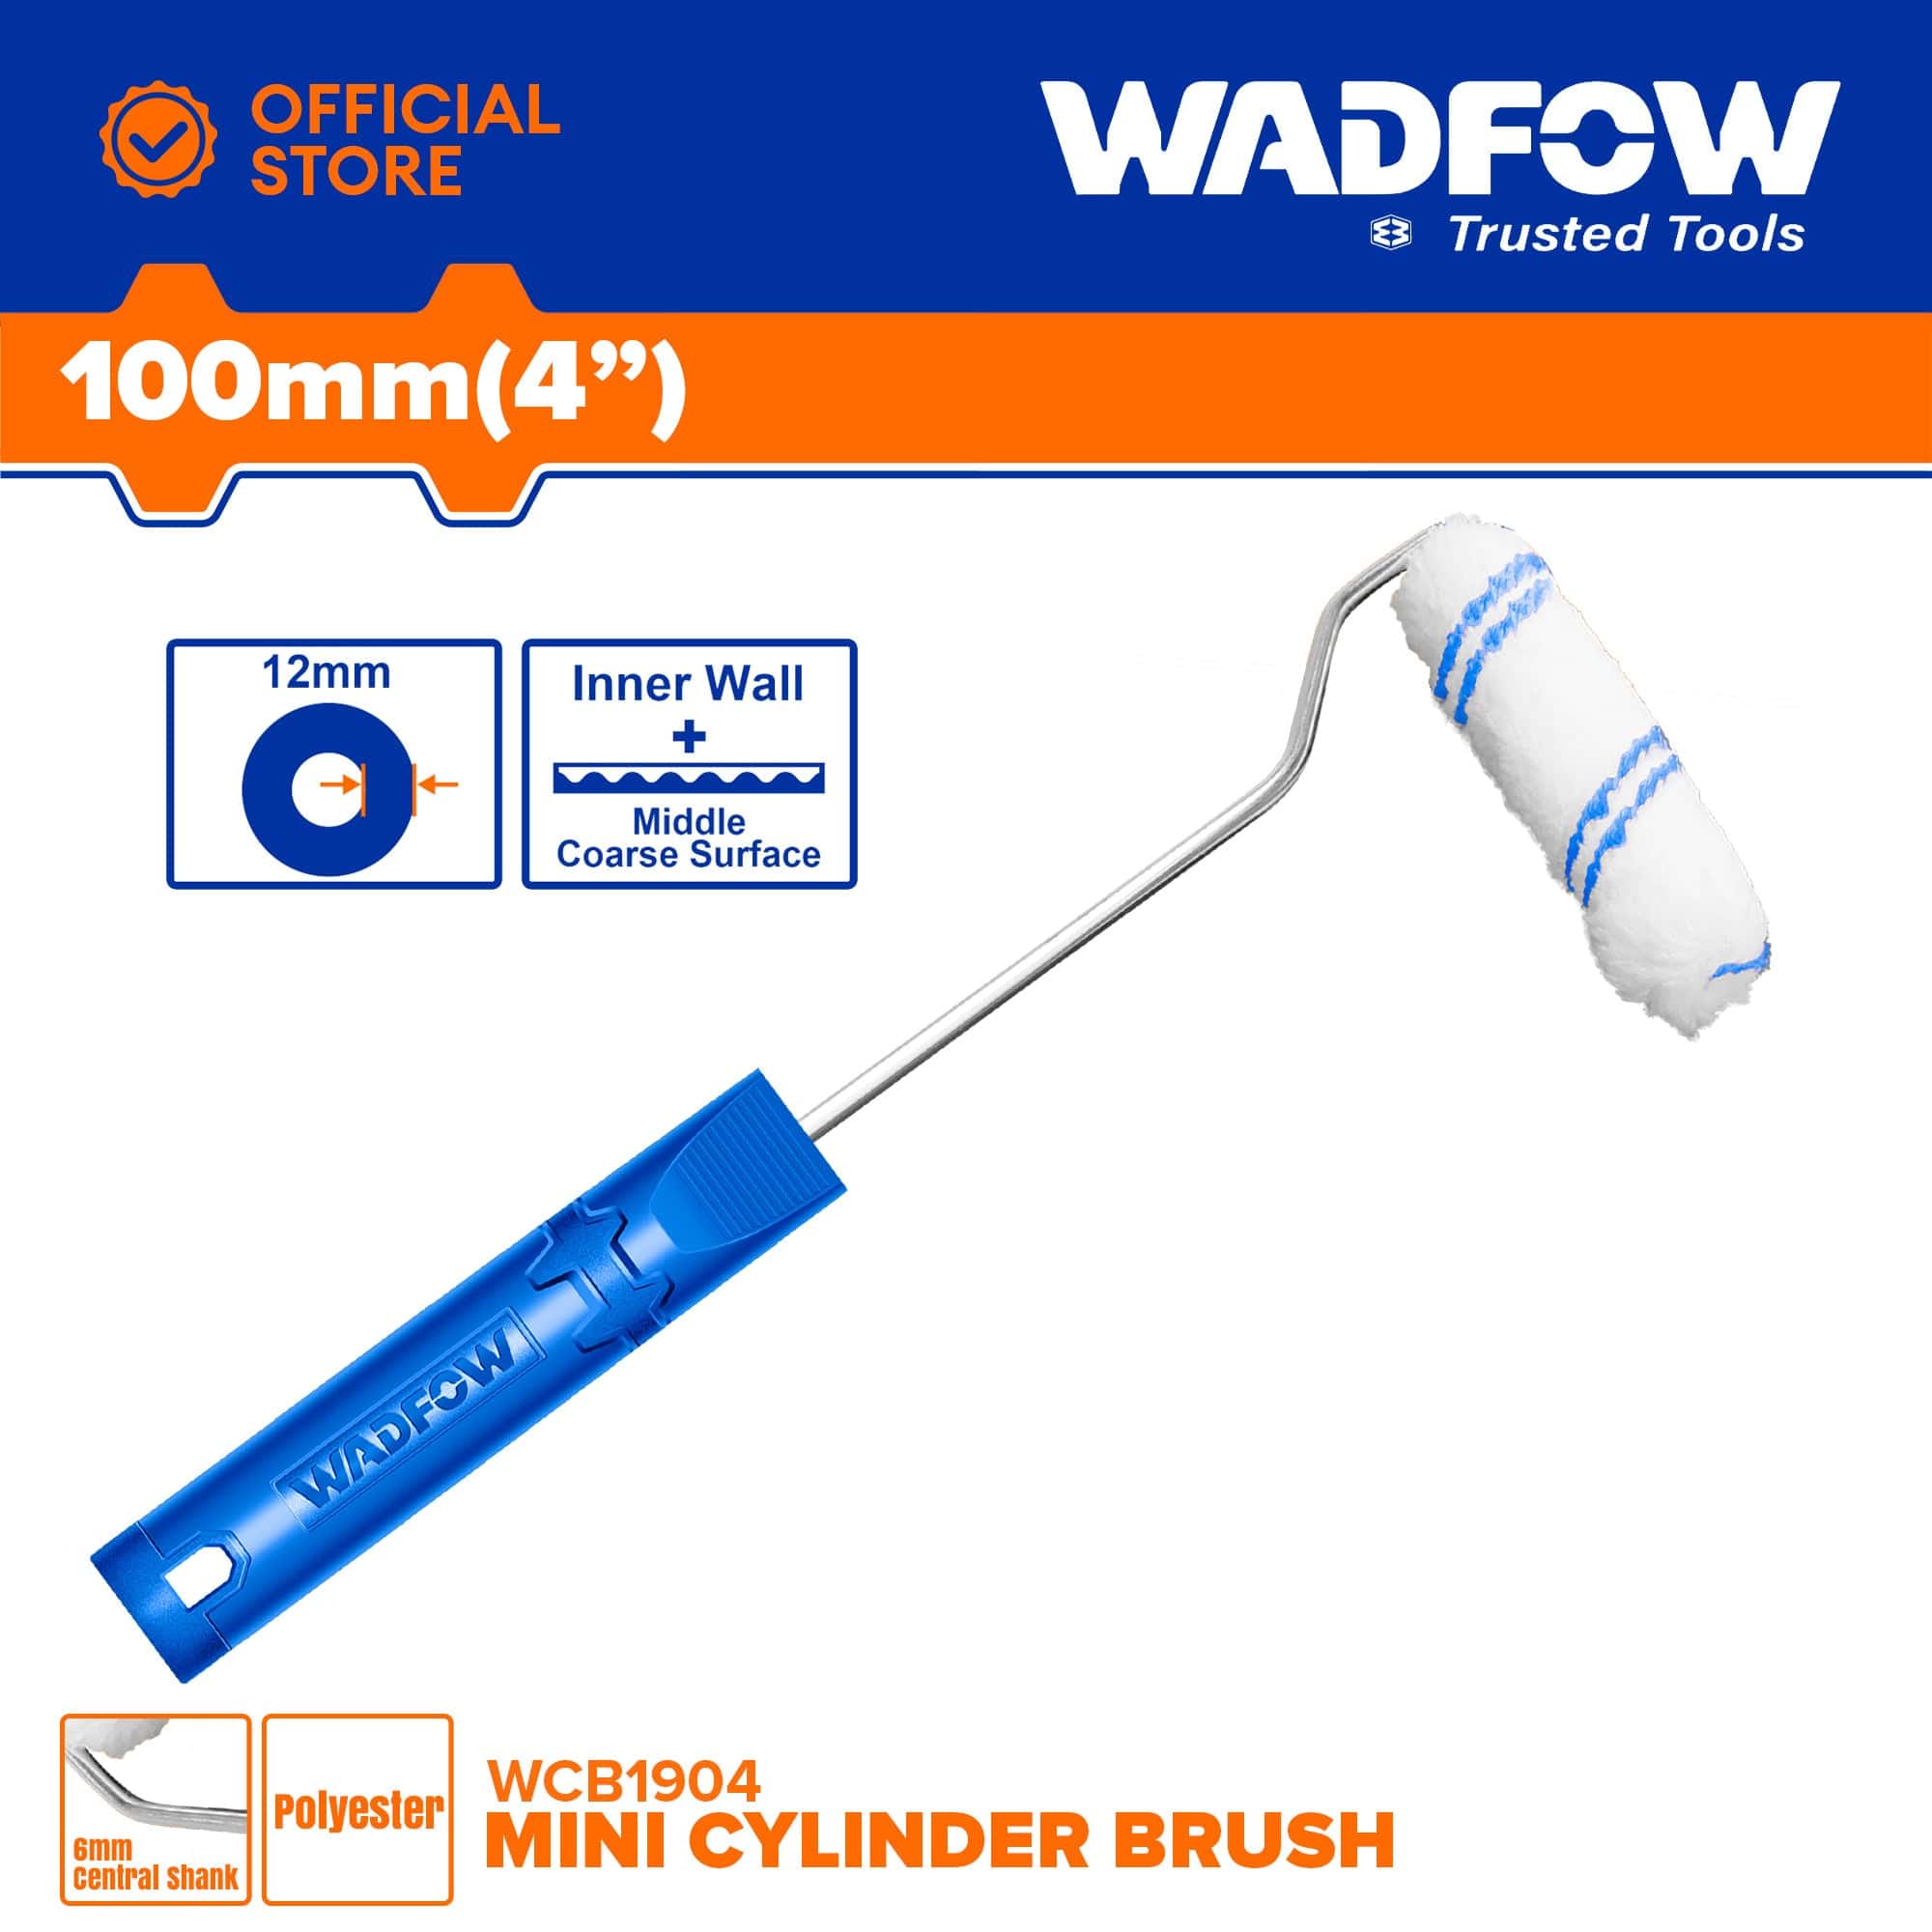 Buy Wadfow 4" Mini Roller Cylinder Brush Online in Accra, Ghana | Supply Master Paint Tools & Equipment Buy Tools hardware Building materials